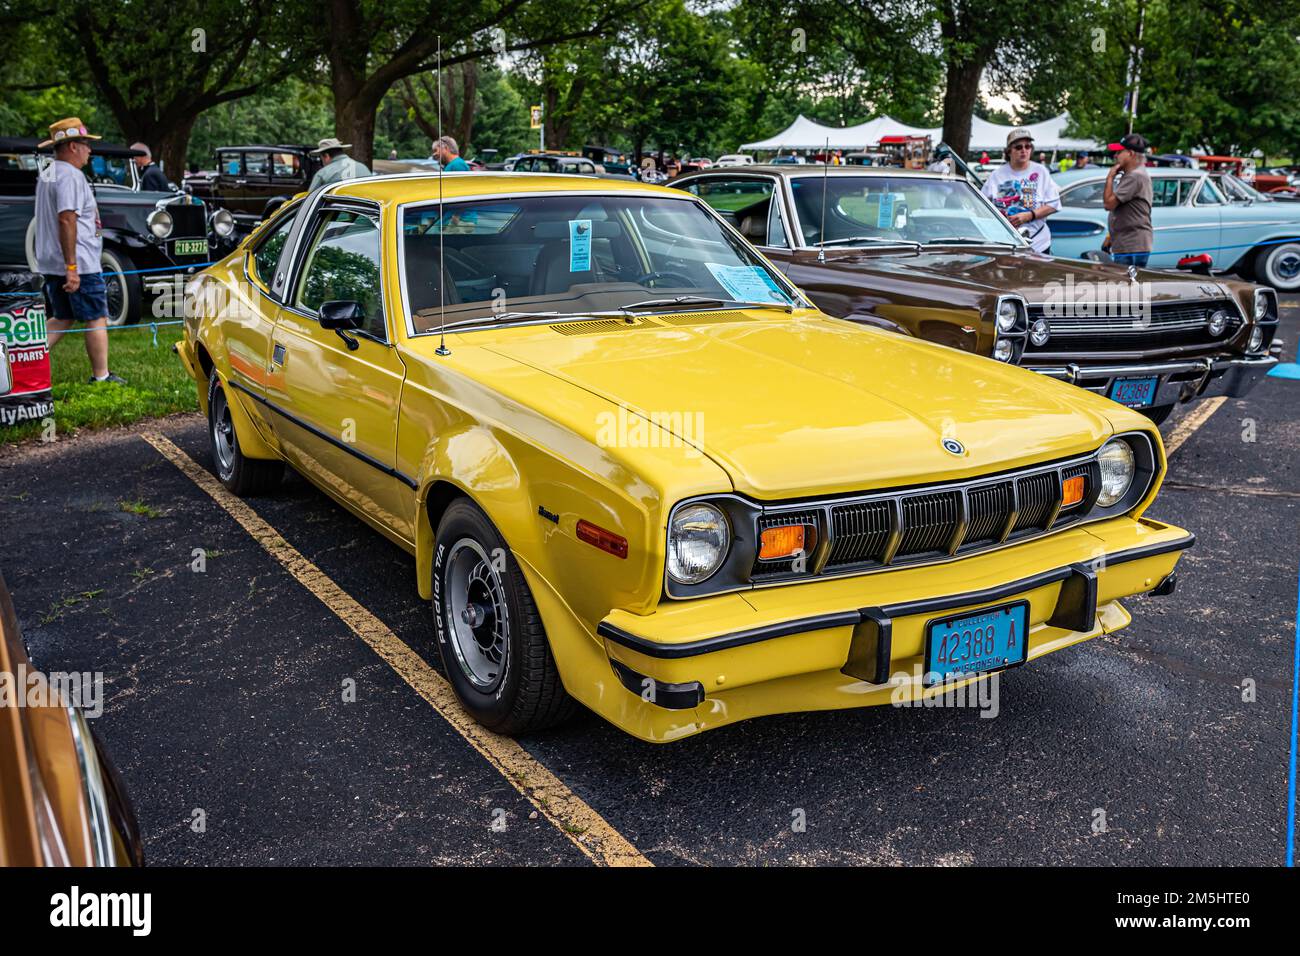 Iola, WI - July 07, 2022: High perspective front corner view of a 1977 AMC Hornet AMX Coupe at a local car show. Stock Photo